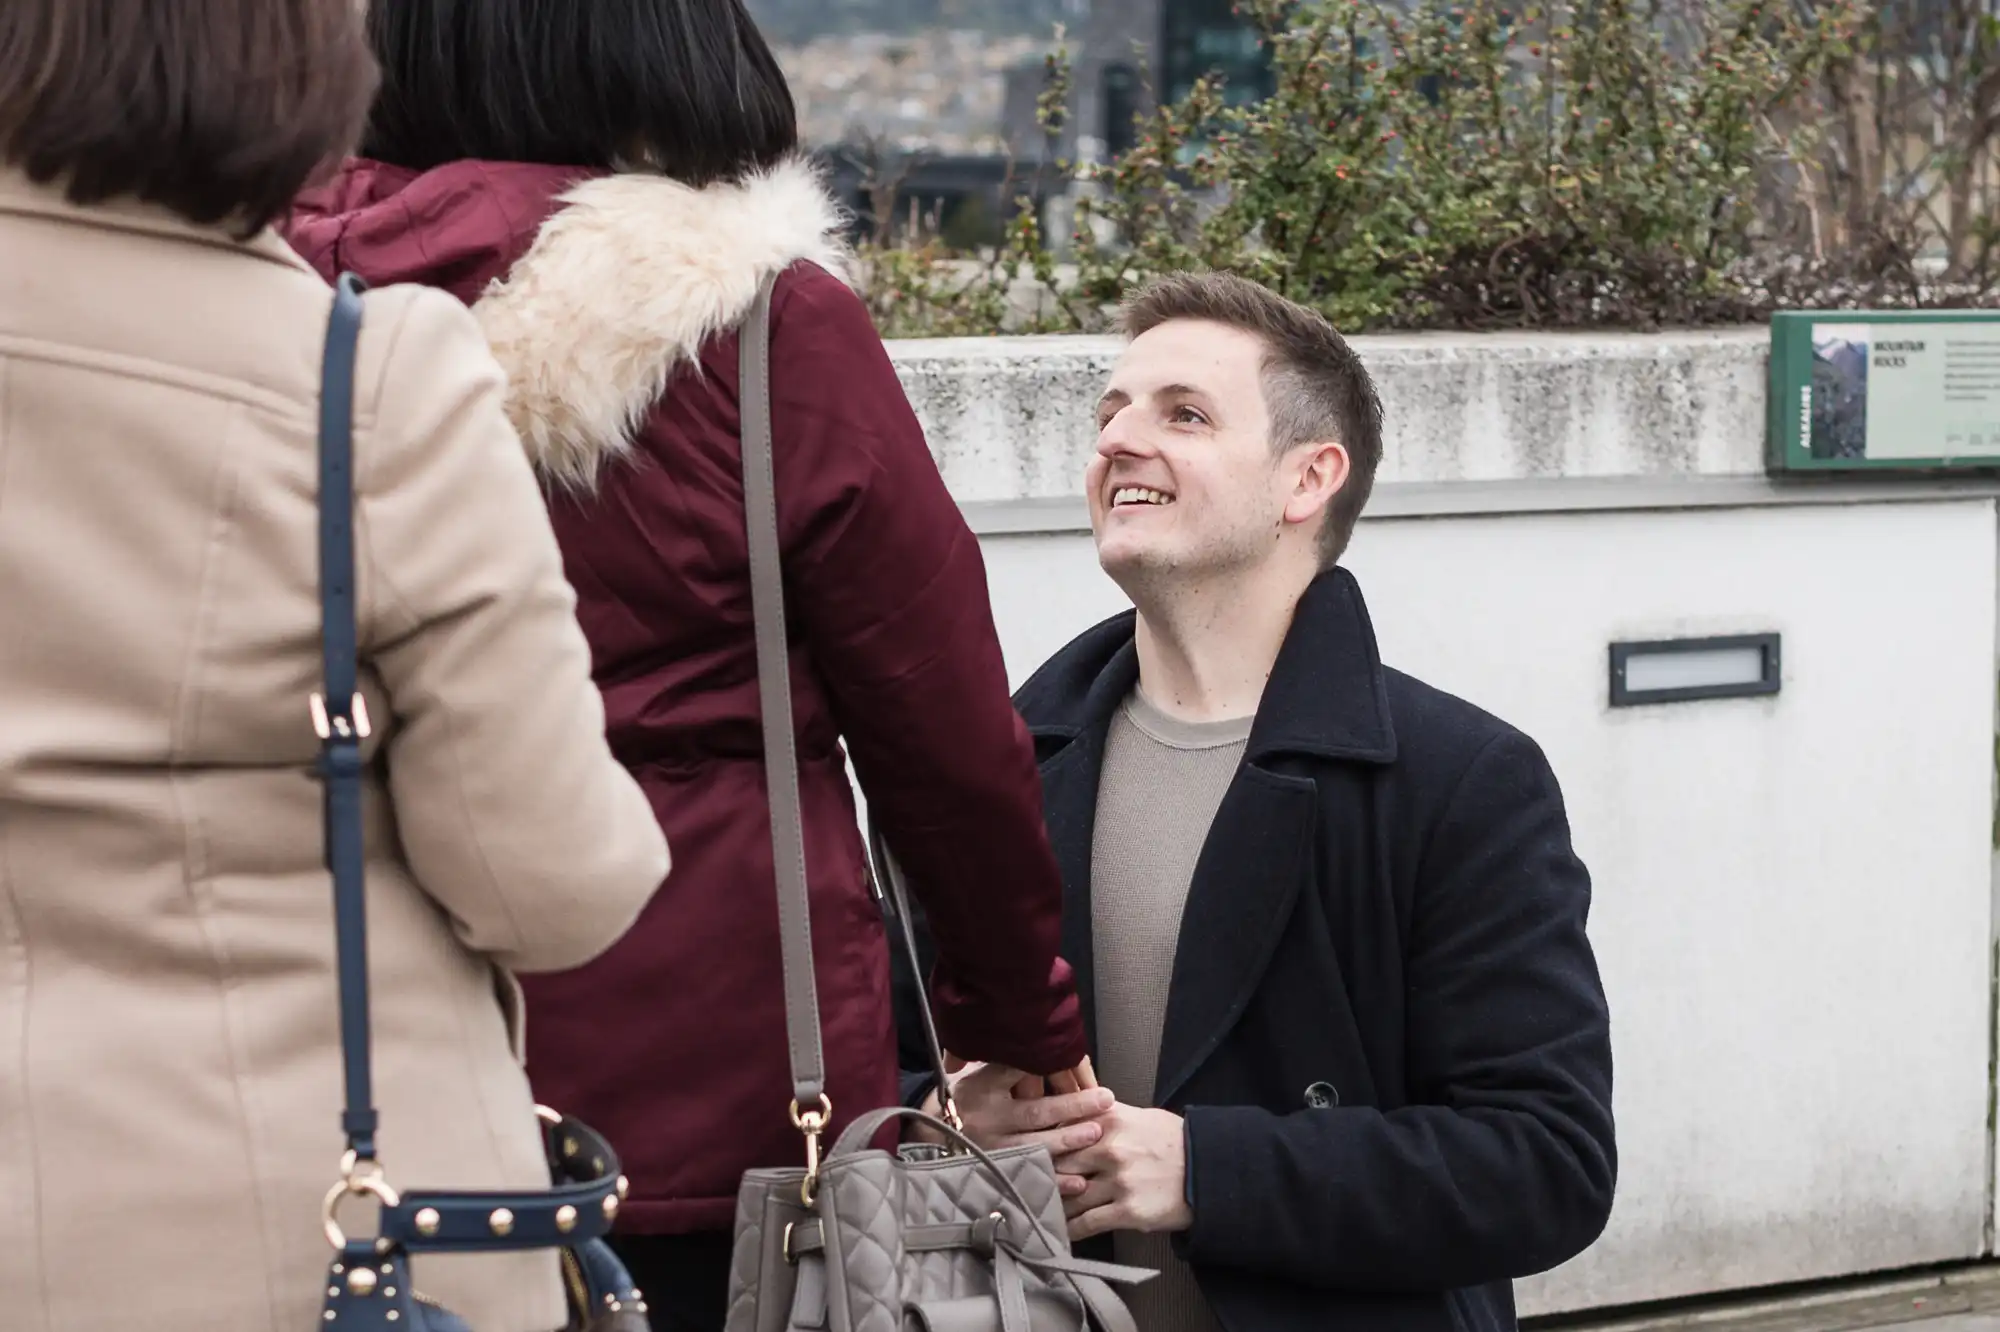 A man smiling and looking up, standing outdoors in conversation with two women who are facing away from the camera.